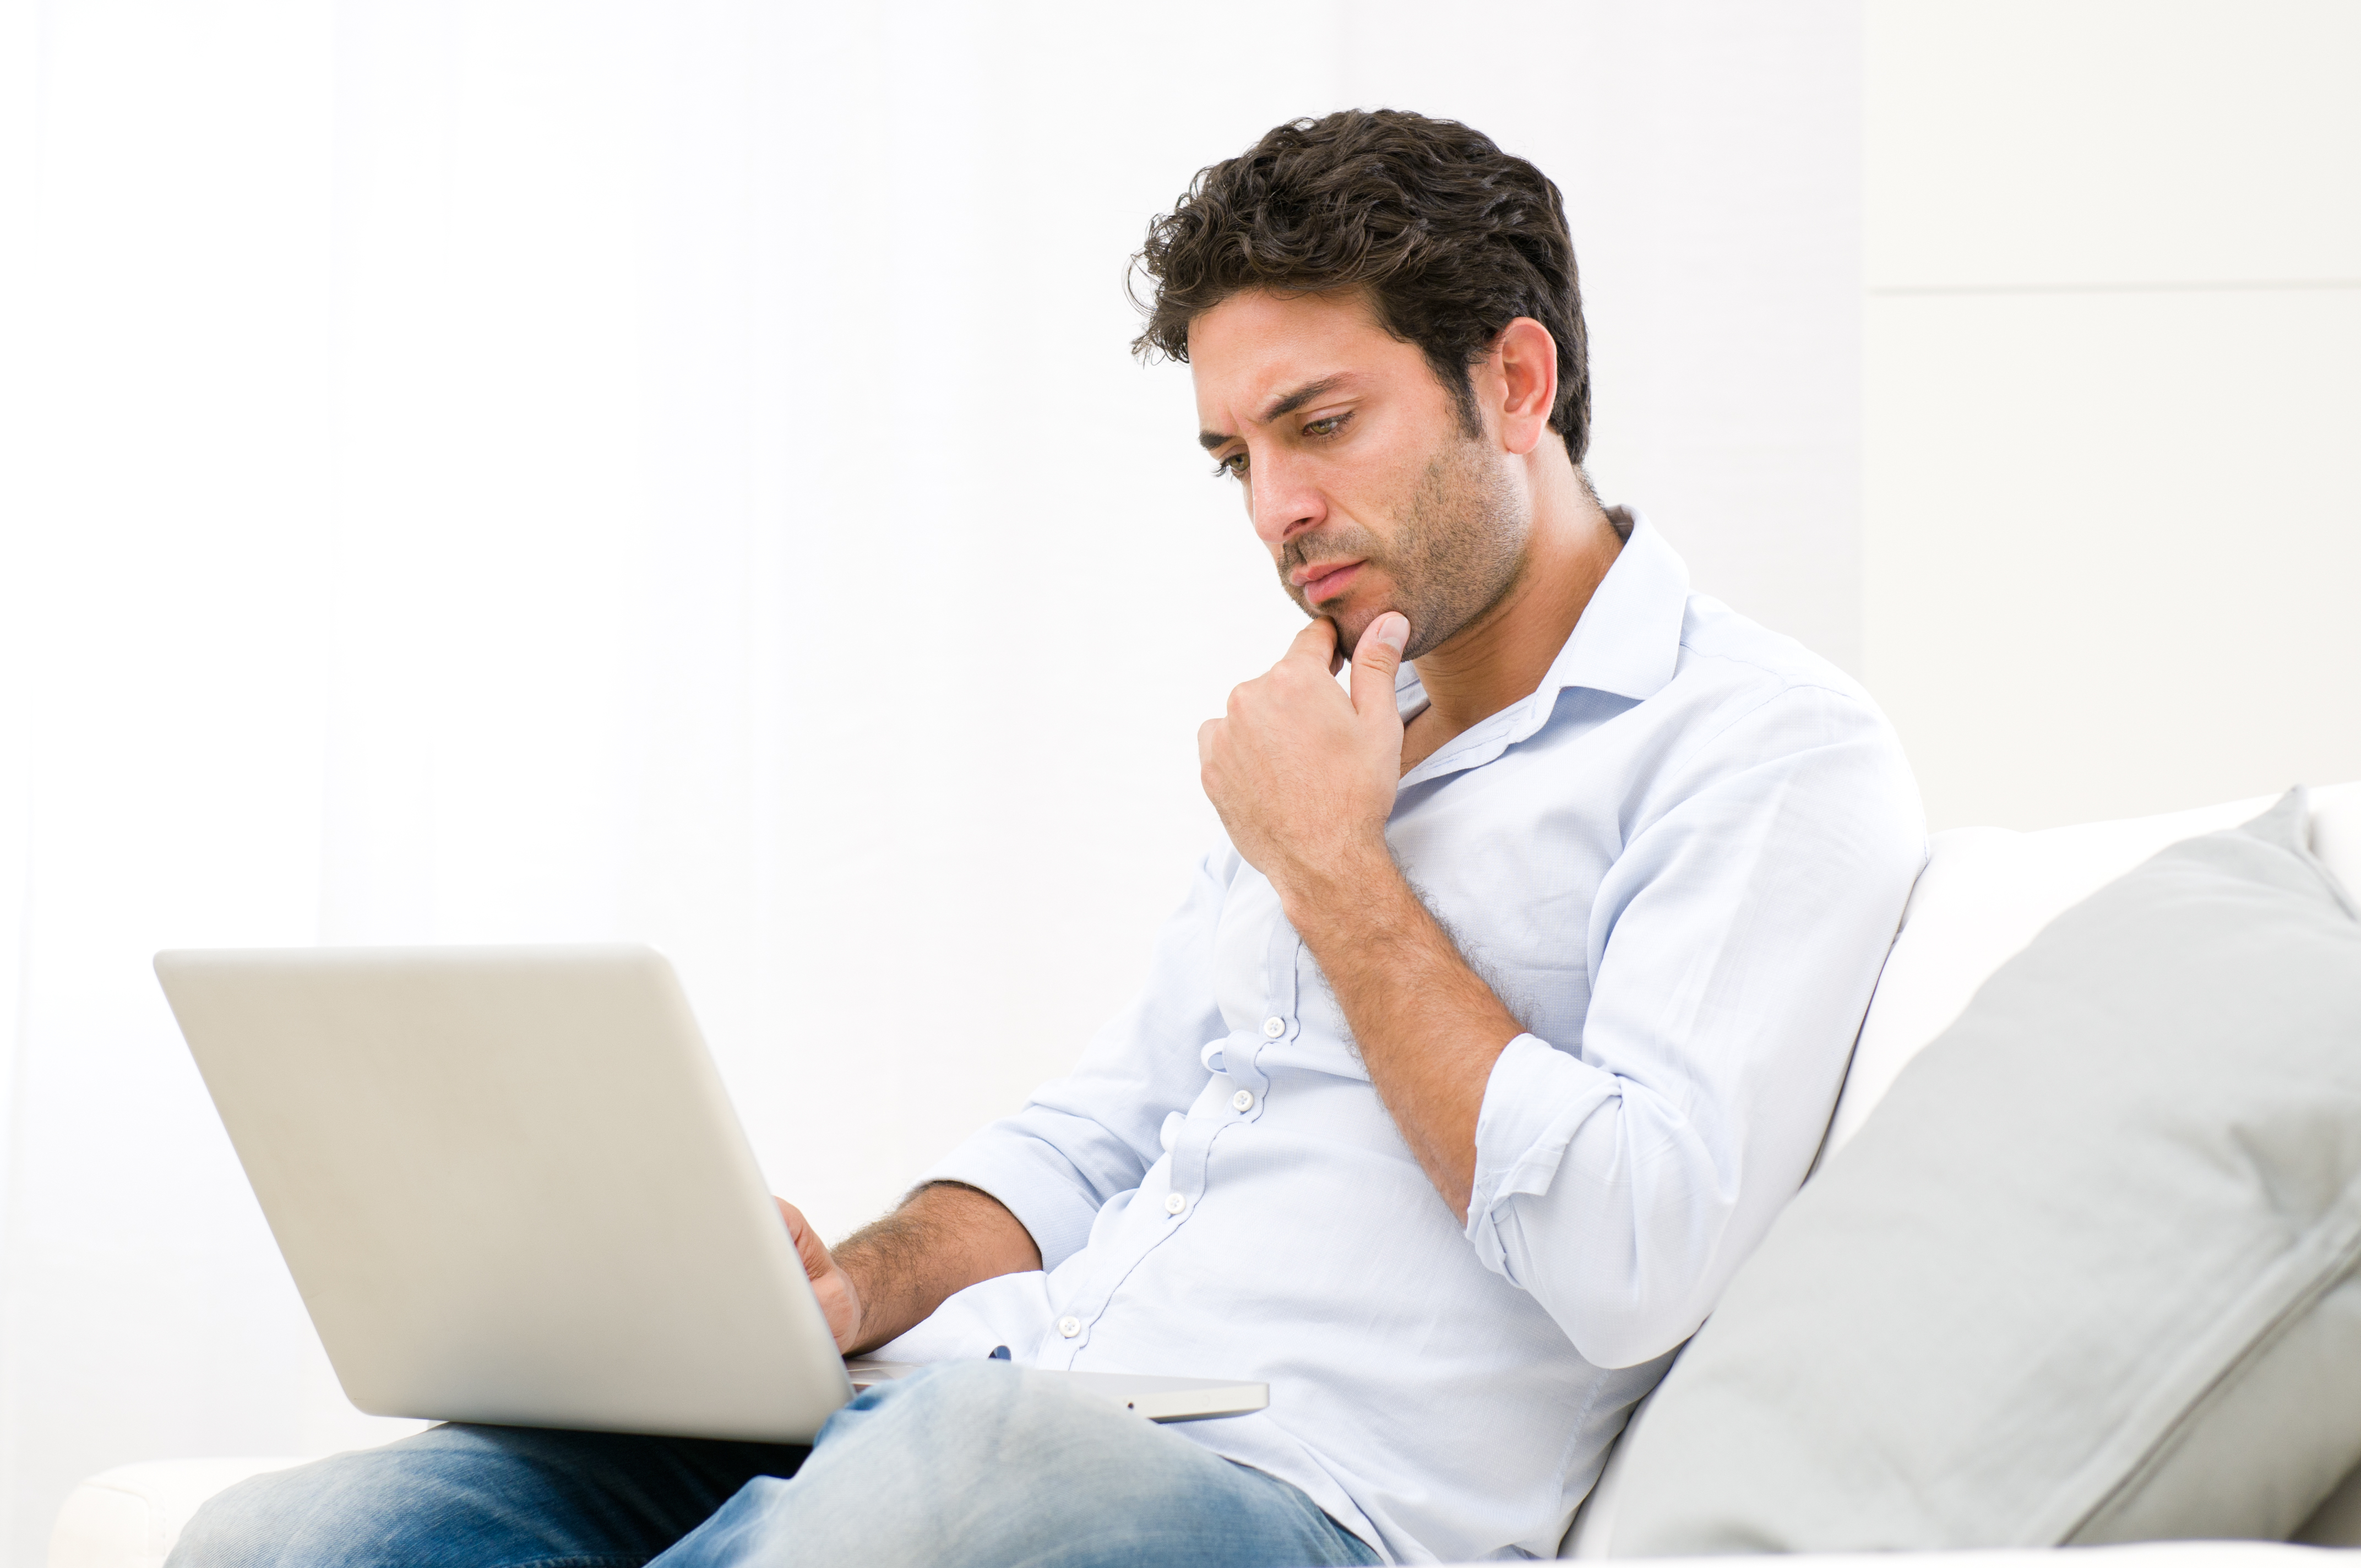 Man looking at his computer | Source: Shutterstock